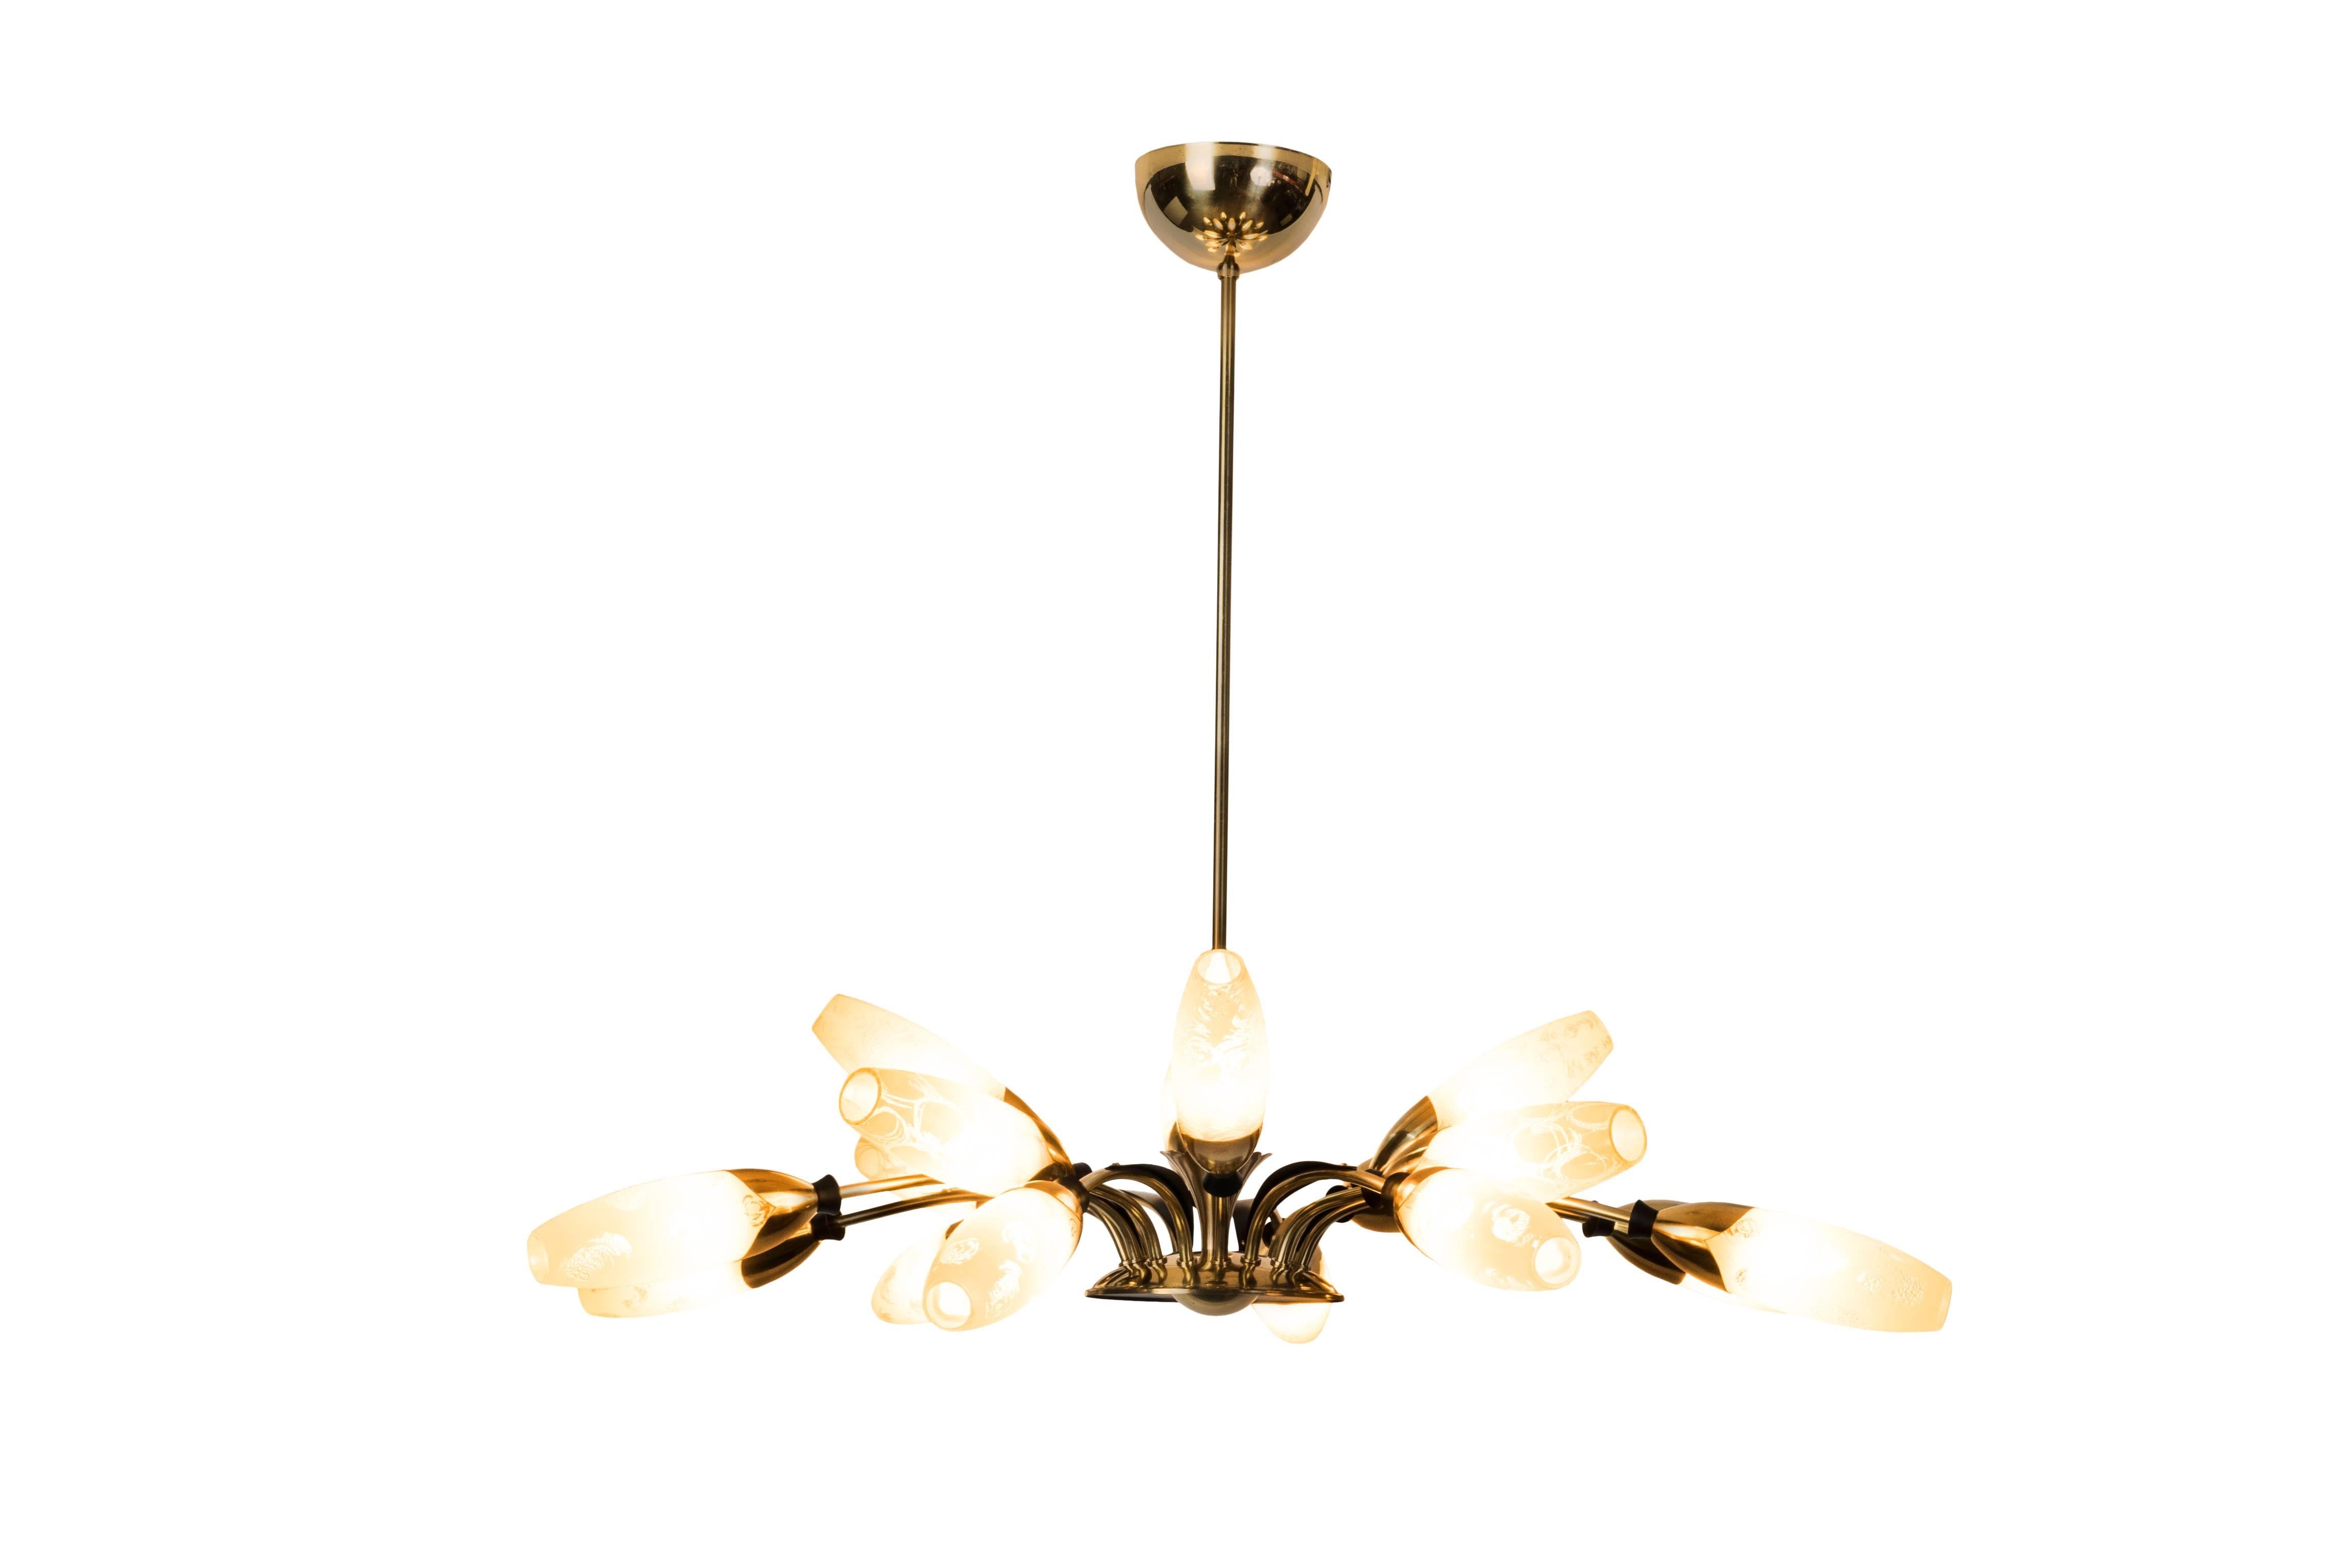 This spectacular 1950s Sputnik spider chandelier features a 16-arms brass frame with leafs and rings details in black enamel and a floral motif glass shades in enamel pearl color. The piece cascades in two levels.

Made in Austria, circa